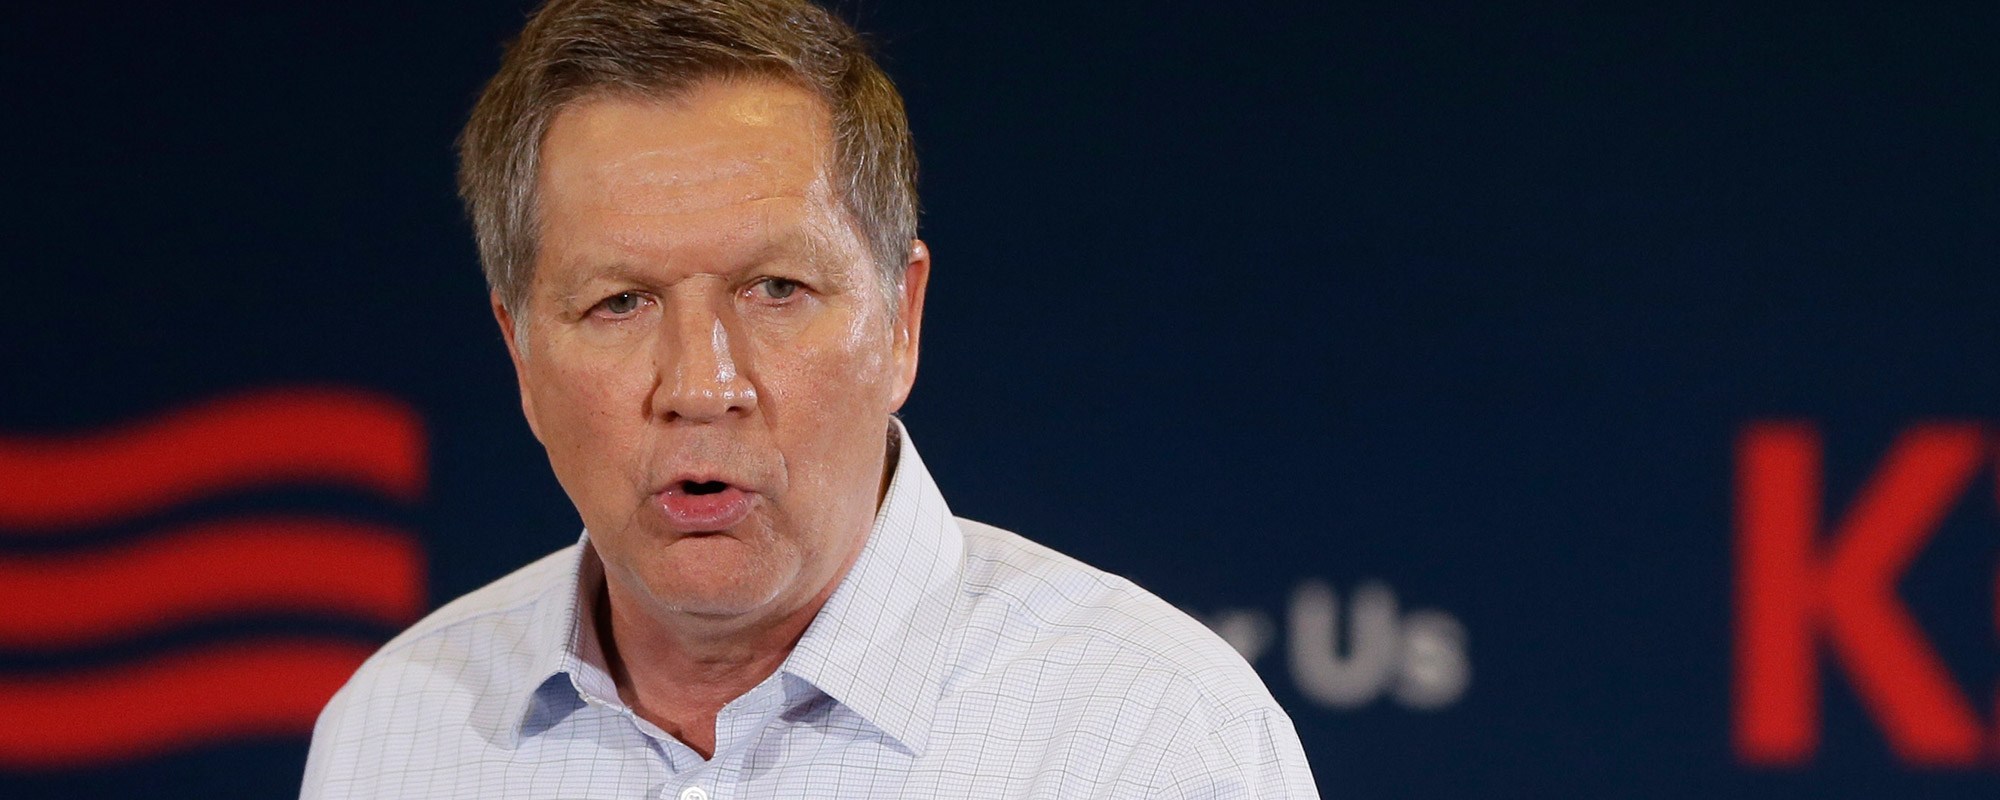 Republican presidential candidate, Ohio Gov. John Kasich, addresses supporters during a town hall meeting, Tuesday, Feb. 16, 2016, in Livonia, Mich.